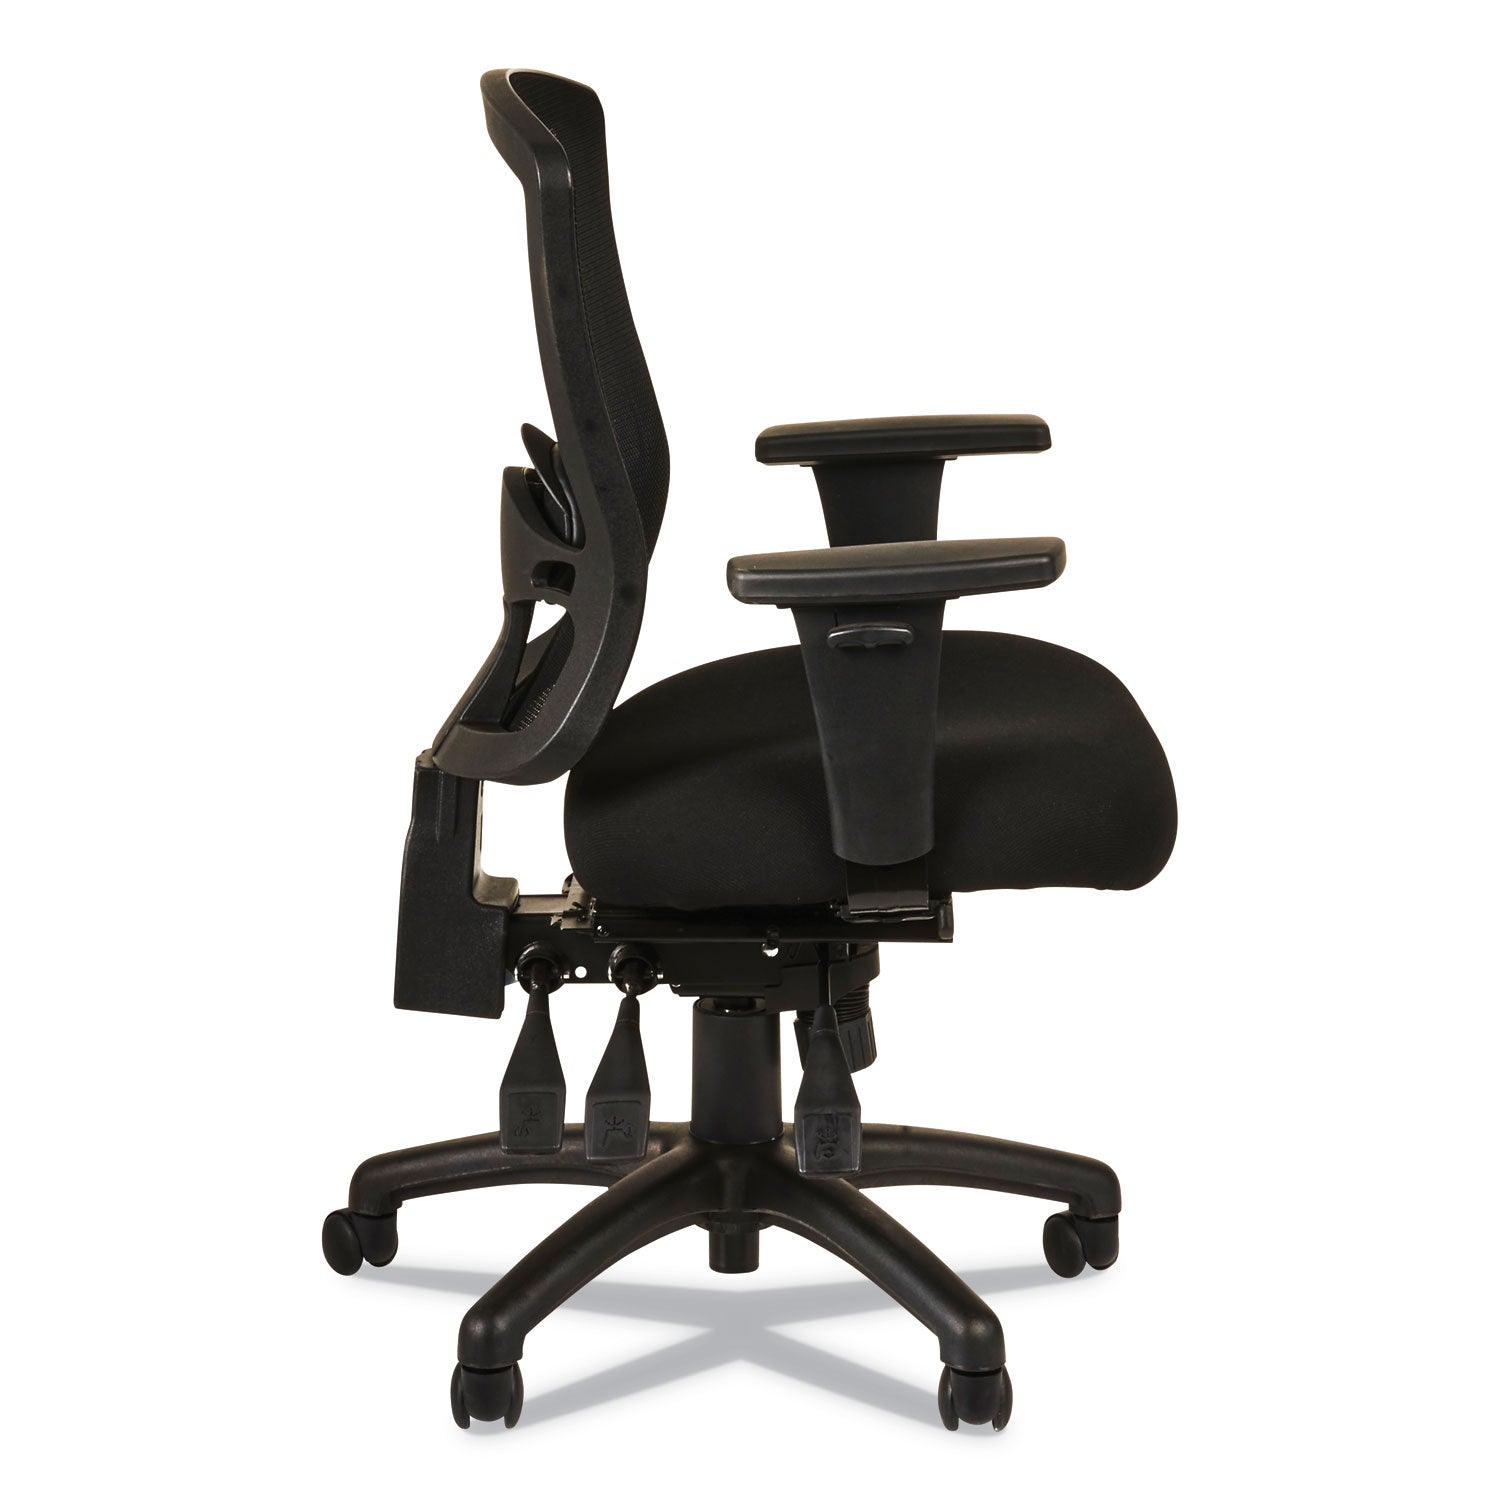 alera-etros-series-mid-back-multifunction-with-seat-slide-chair-supports-up-to-275-lb-1783-to-2145-seat-height-black_aleet4217 - 4